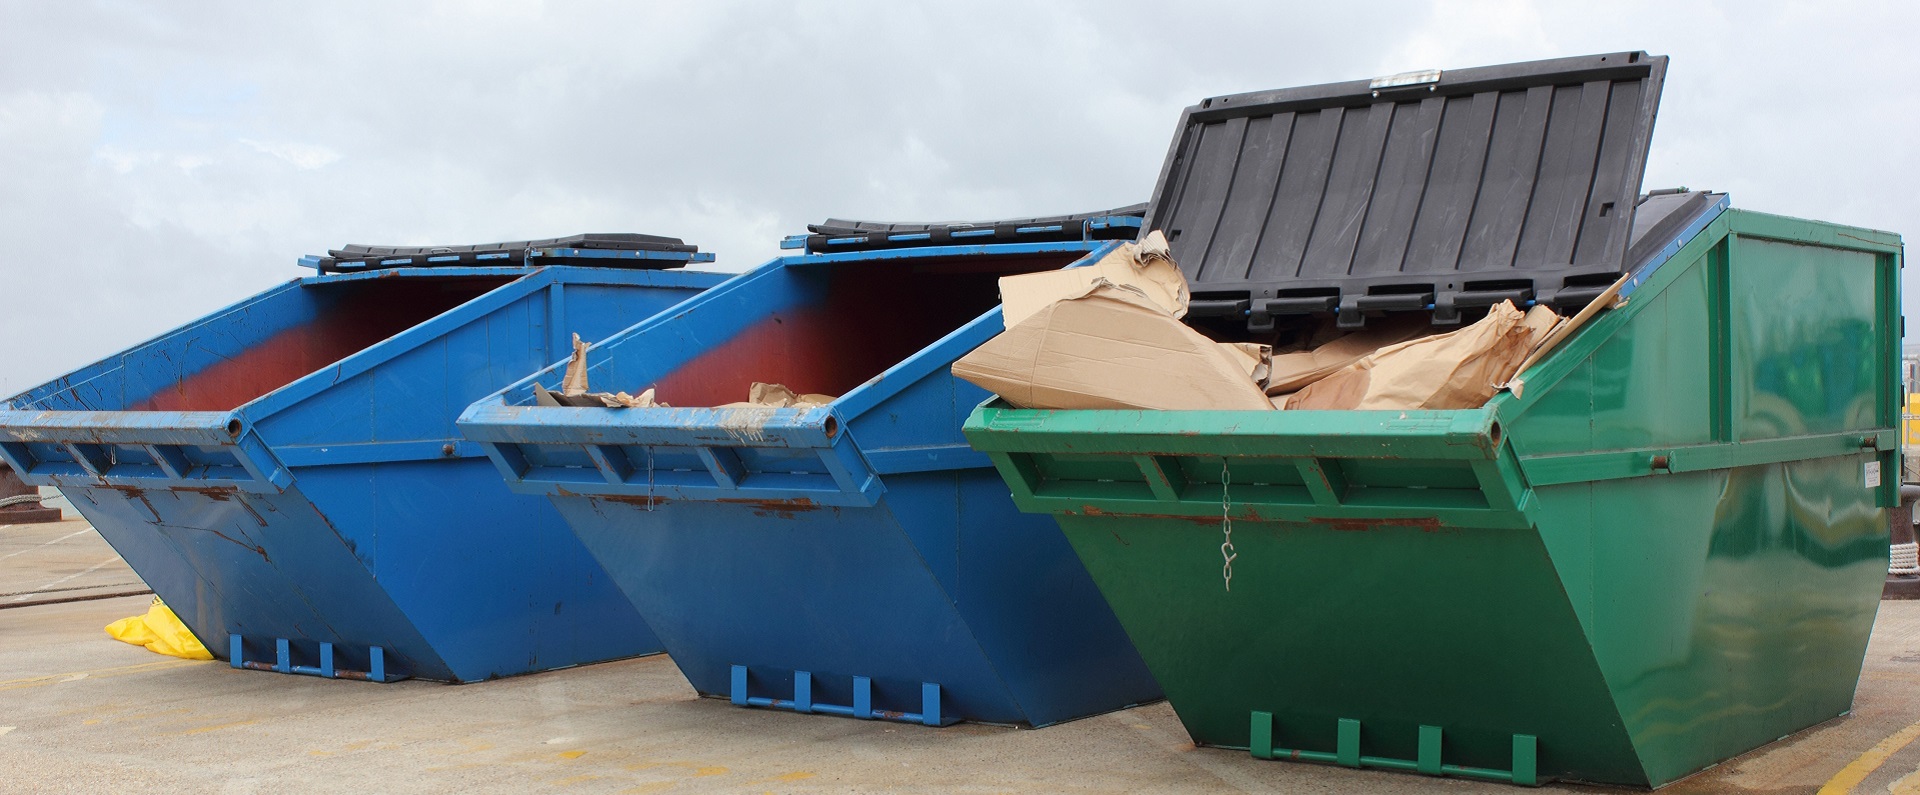 THE CORRECT MANAGEMENT OF SPECIAL WASTE AND ITS DISPOSAL